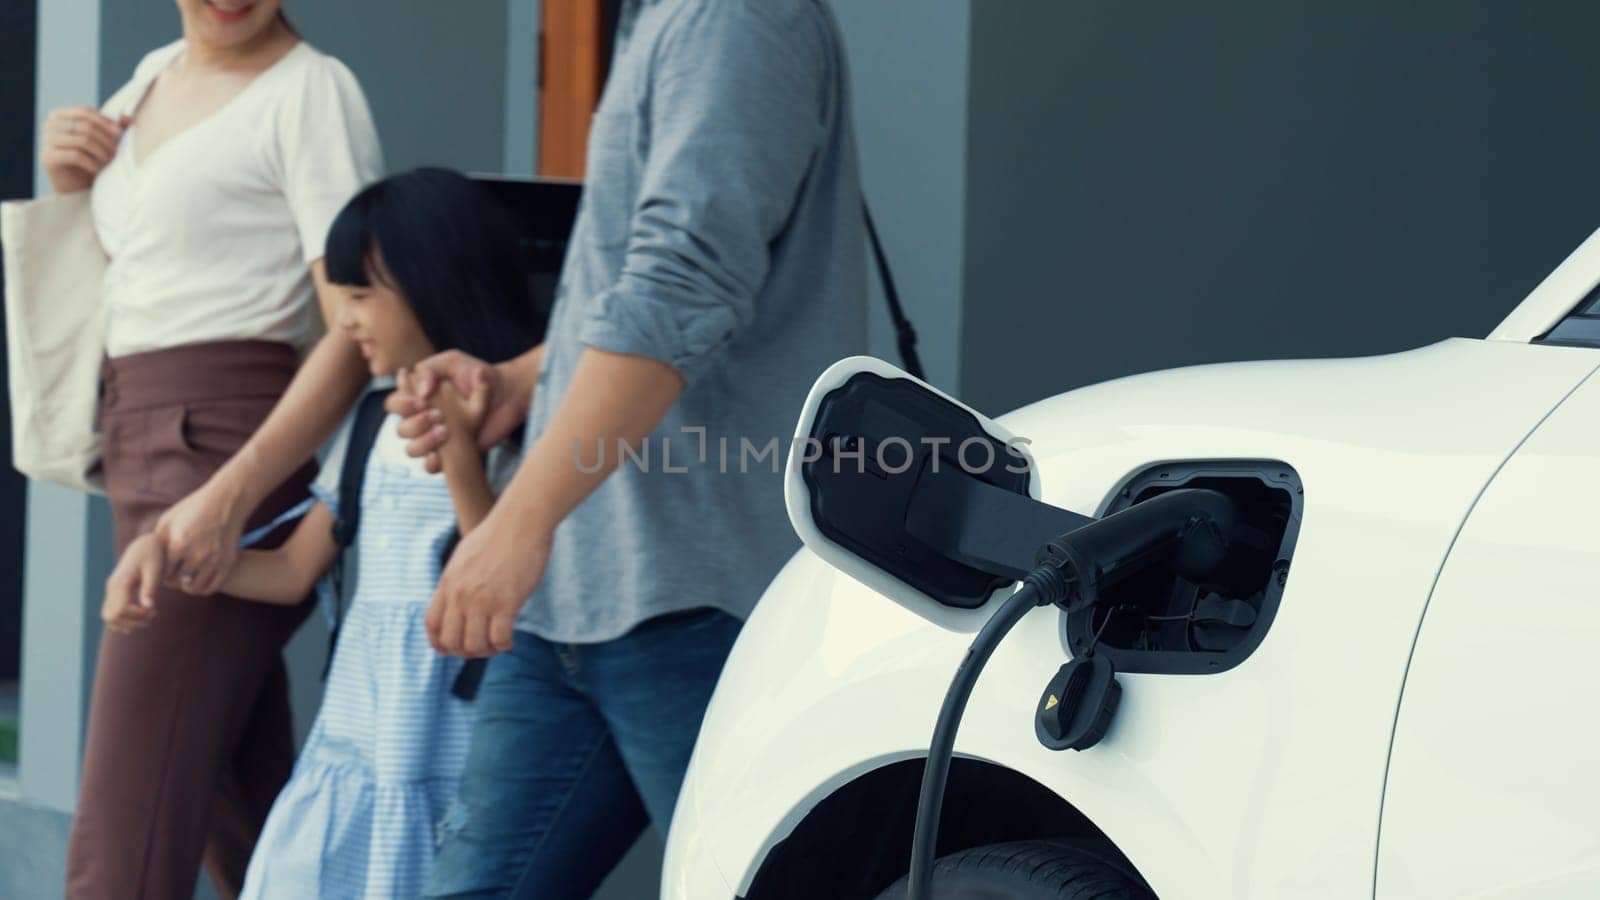 Progressive parent have returned from picking up daughter at school with EV car. by biancoblue